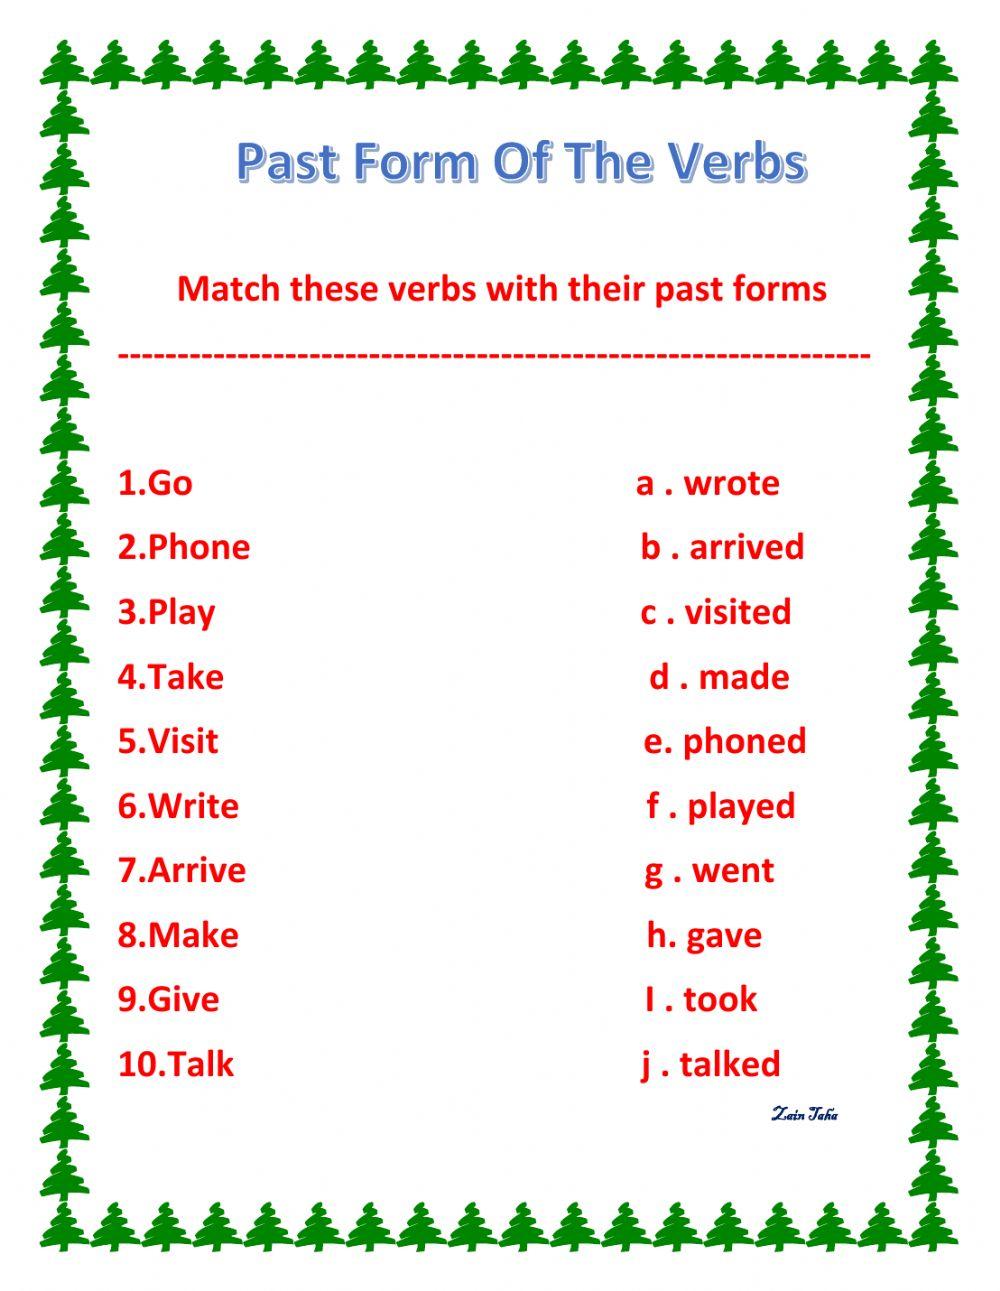 The past form of the verbs